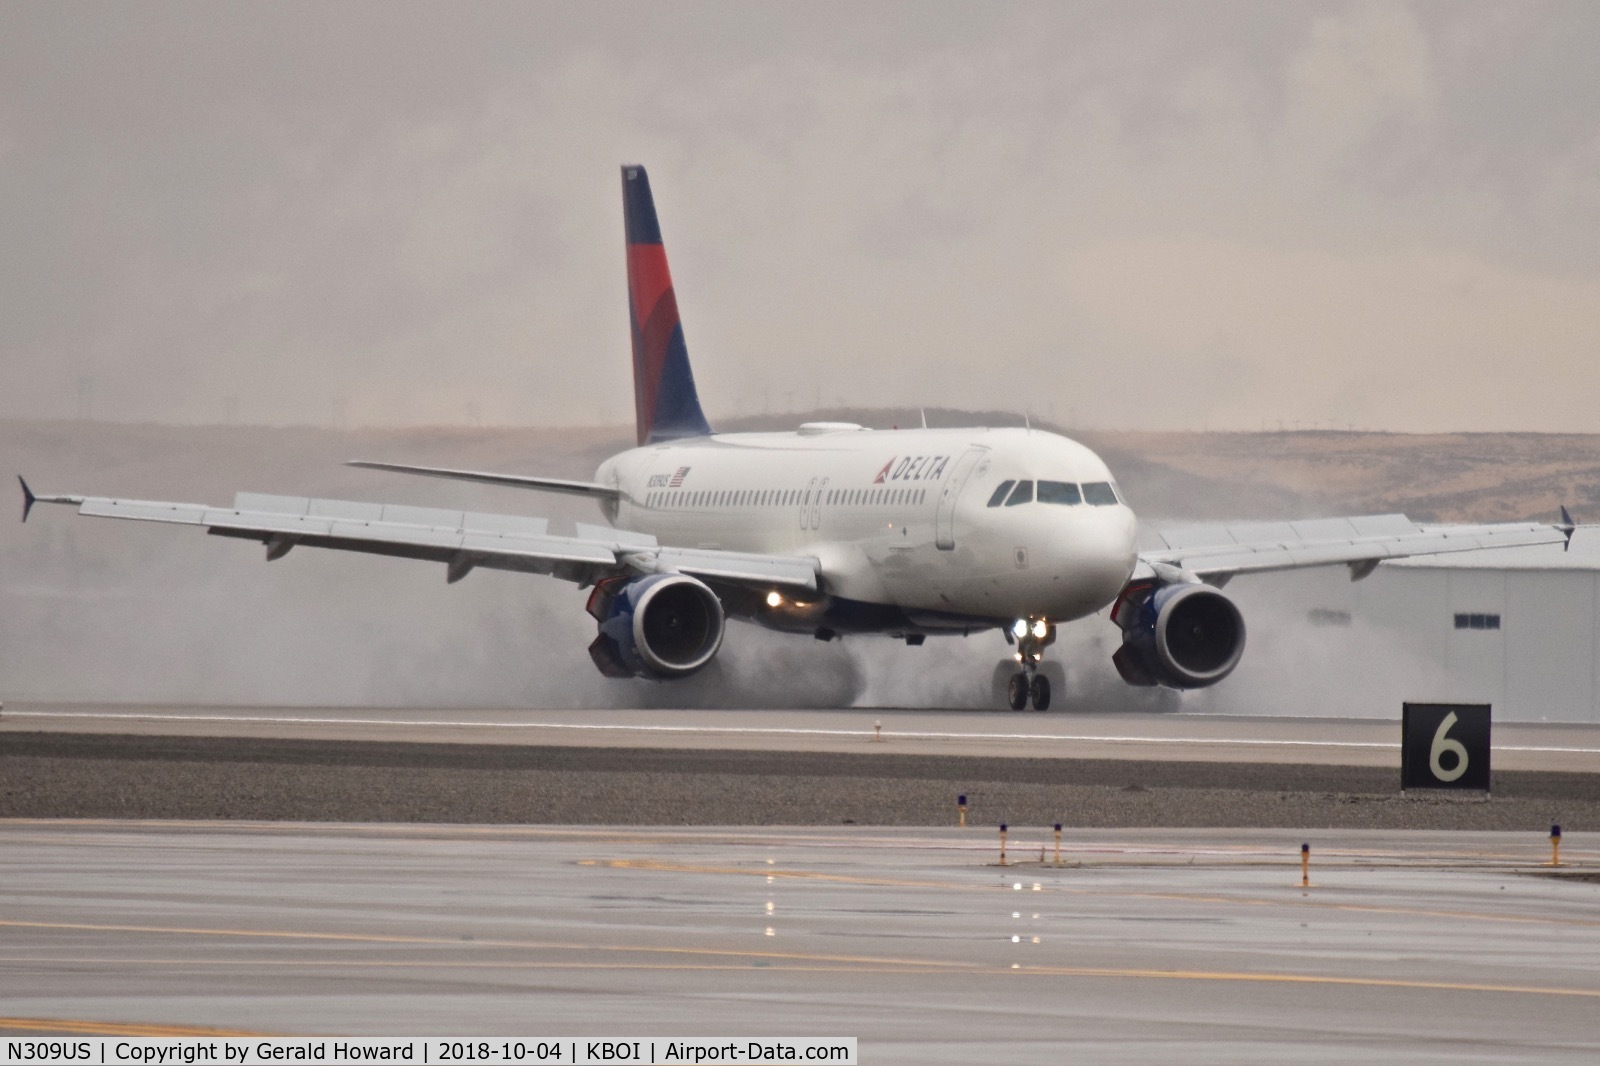 N309US, 1990 Airbus A320-211 C/N 118, Start of landing roll out on RWY 28R.